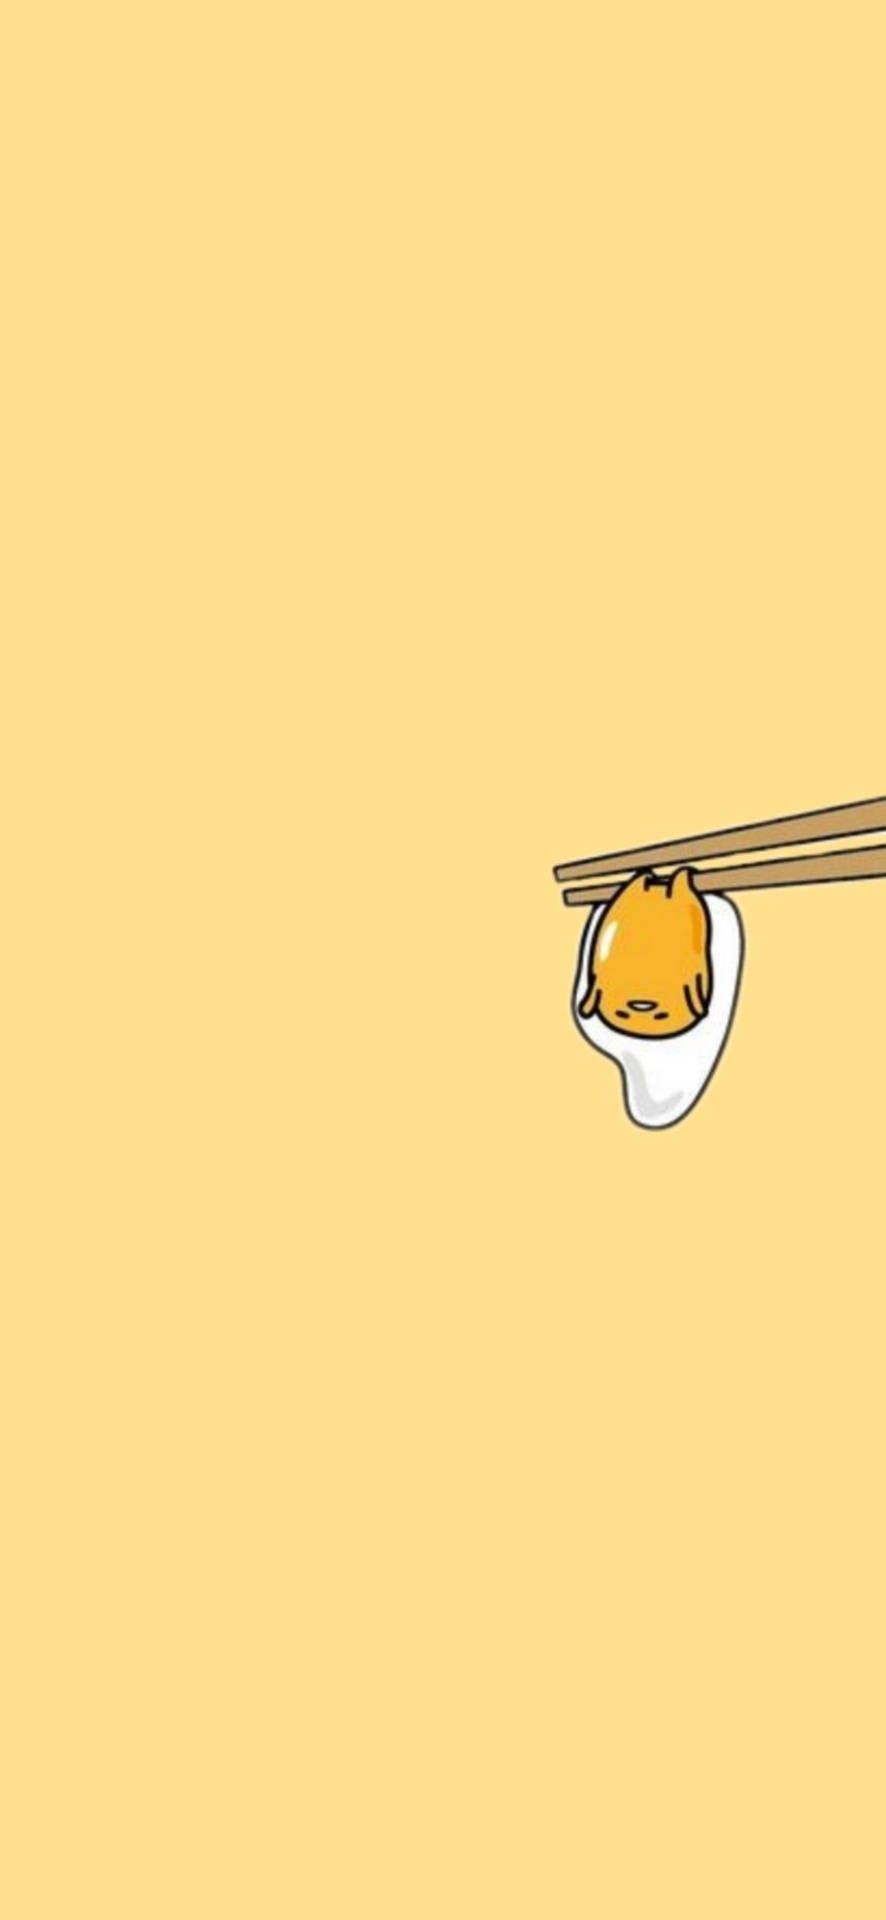 A cartoon of chinese food on yellow background - Egg